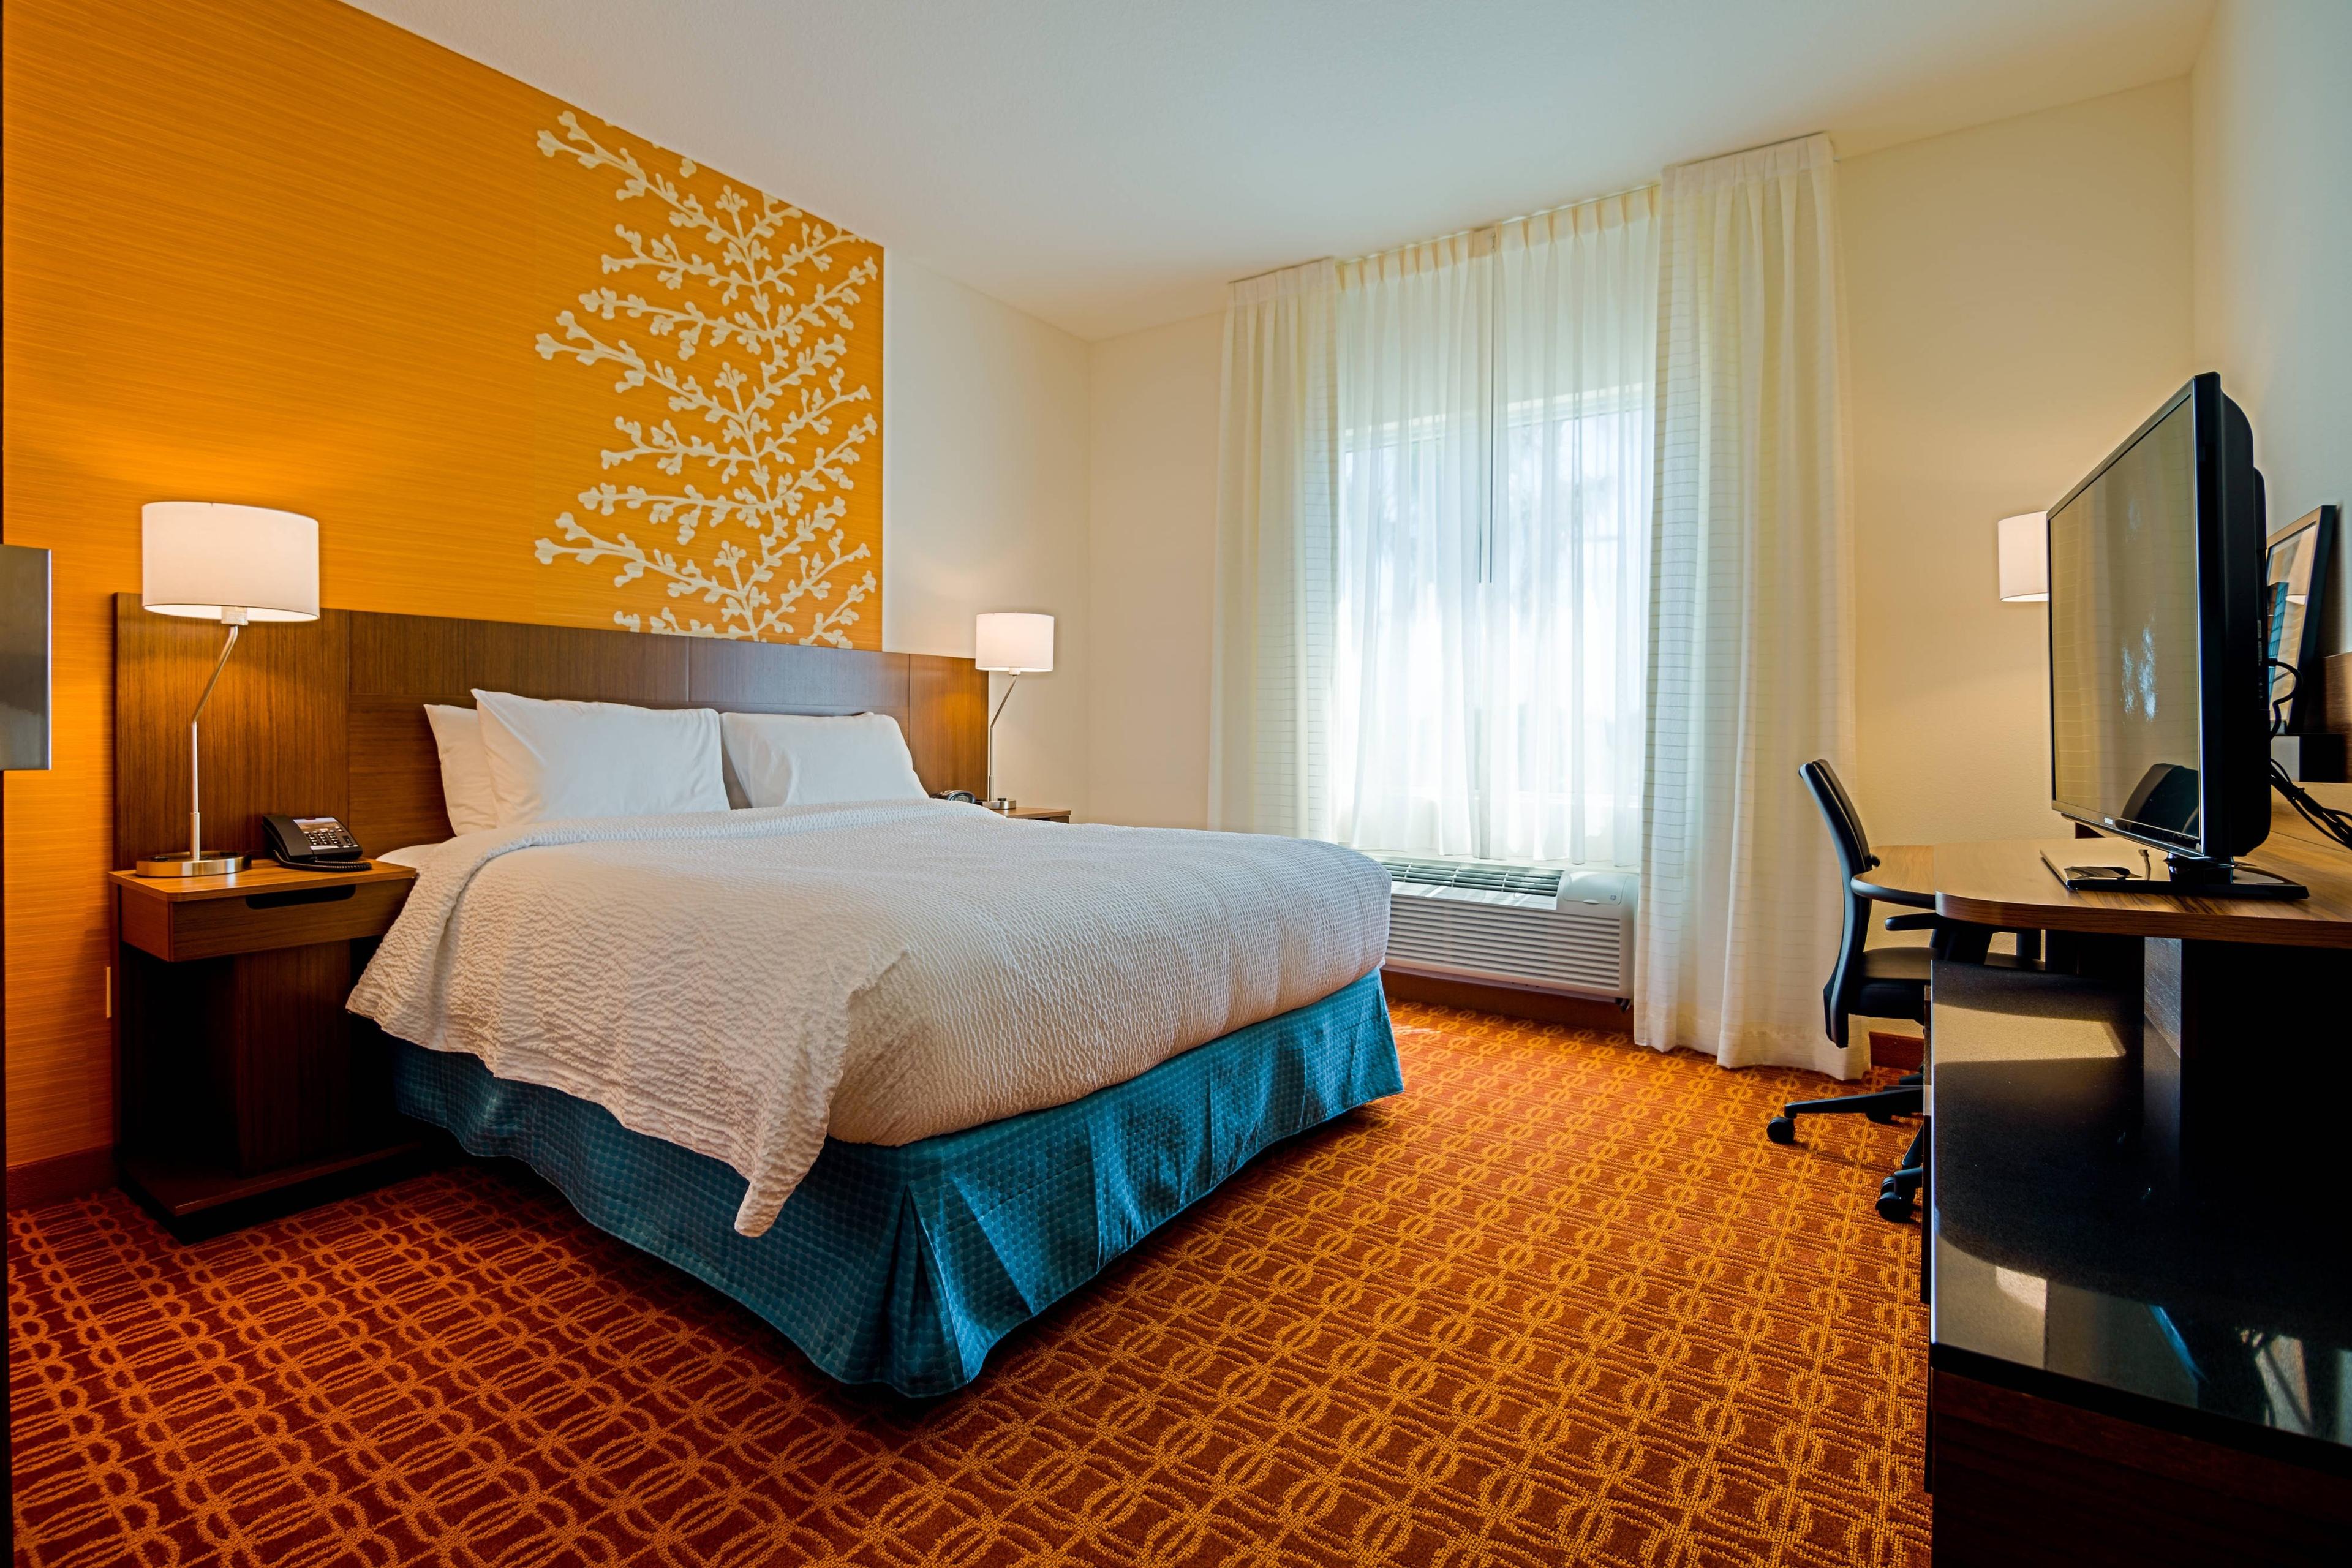 Sleep tight nestled in a king bed when you book a king guest room complete with a flat-panel TV, ergonomic workstation and free high-speed Wi-Fi.